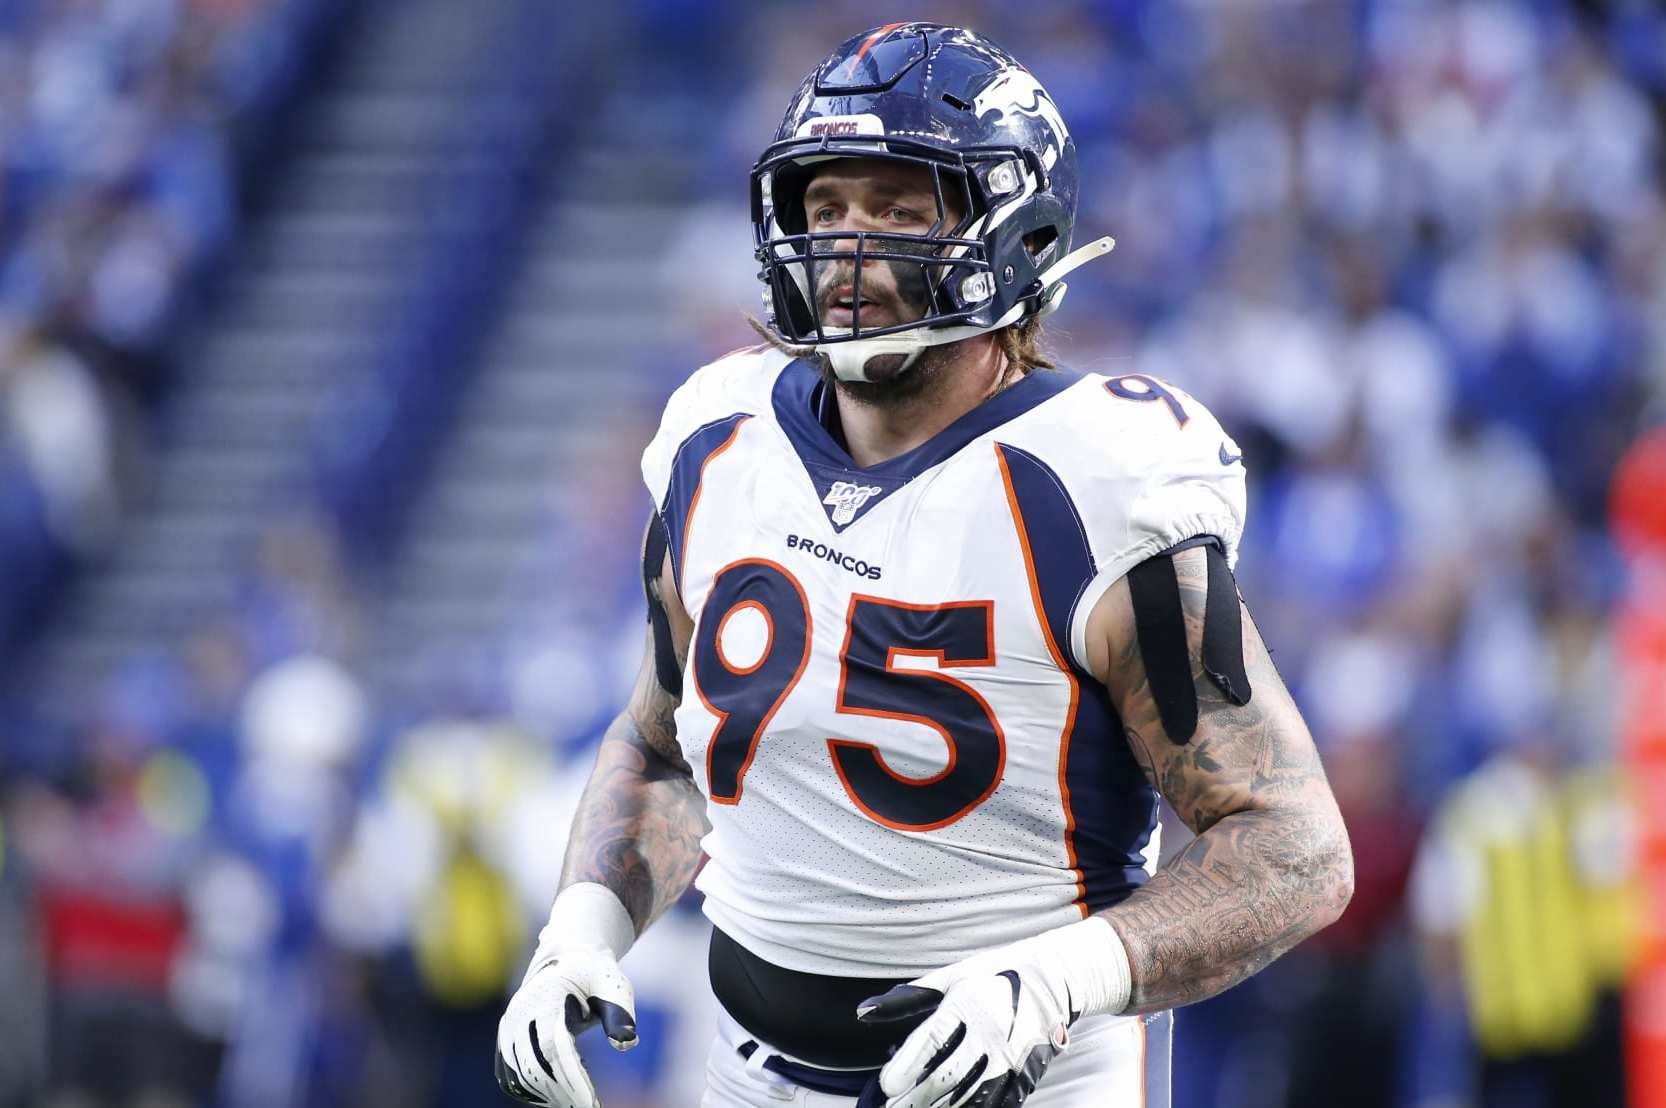 Derek Wolfe: Retired Super Bowl champion hunted a gigantic mountain lion  that 'wreaked havoc' in a neighborhood